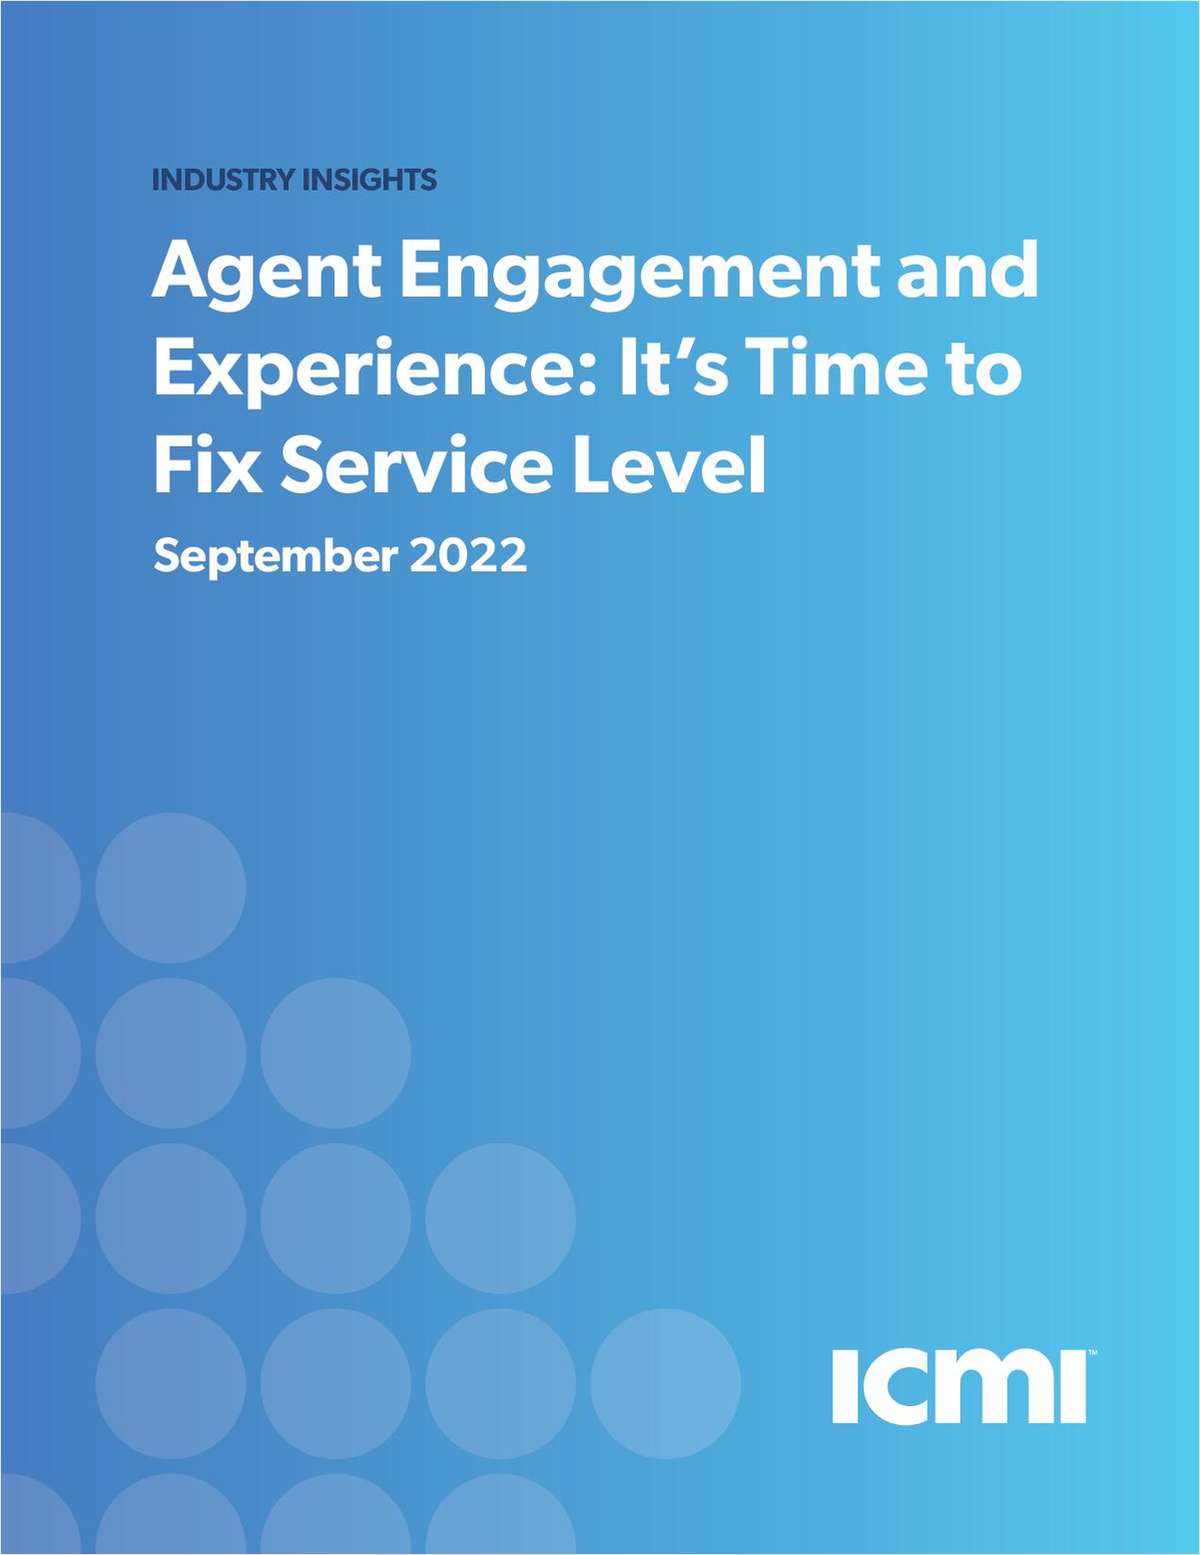 Agent Engagement and Experience: It's Time to Fix Service Level